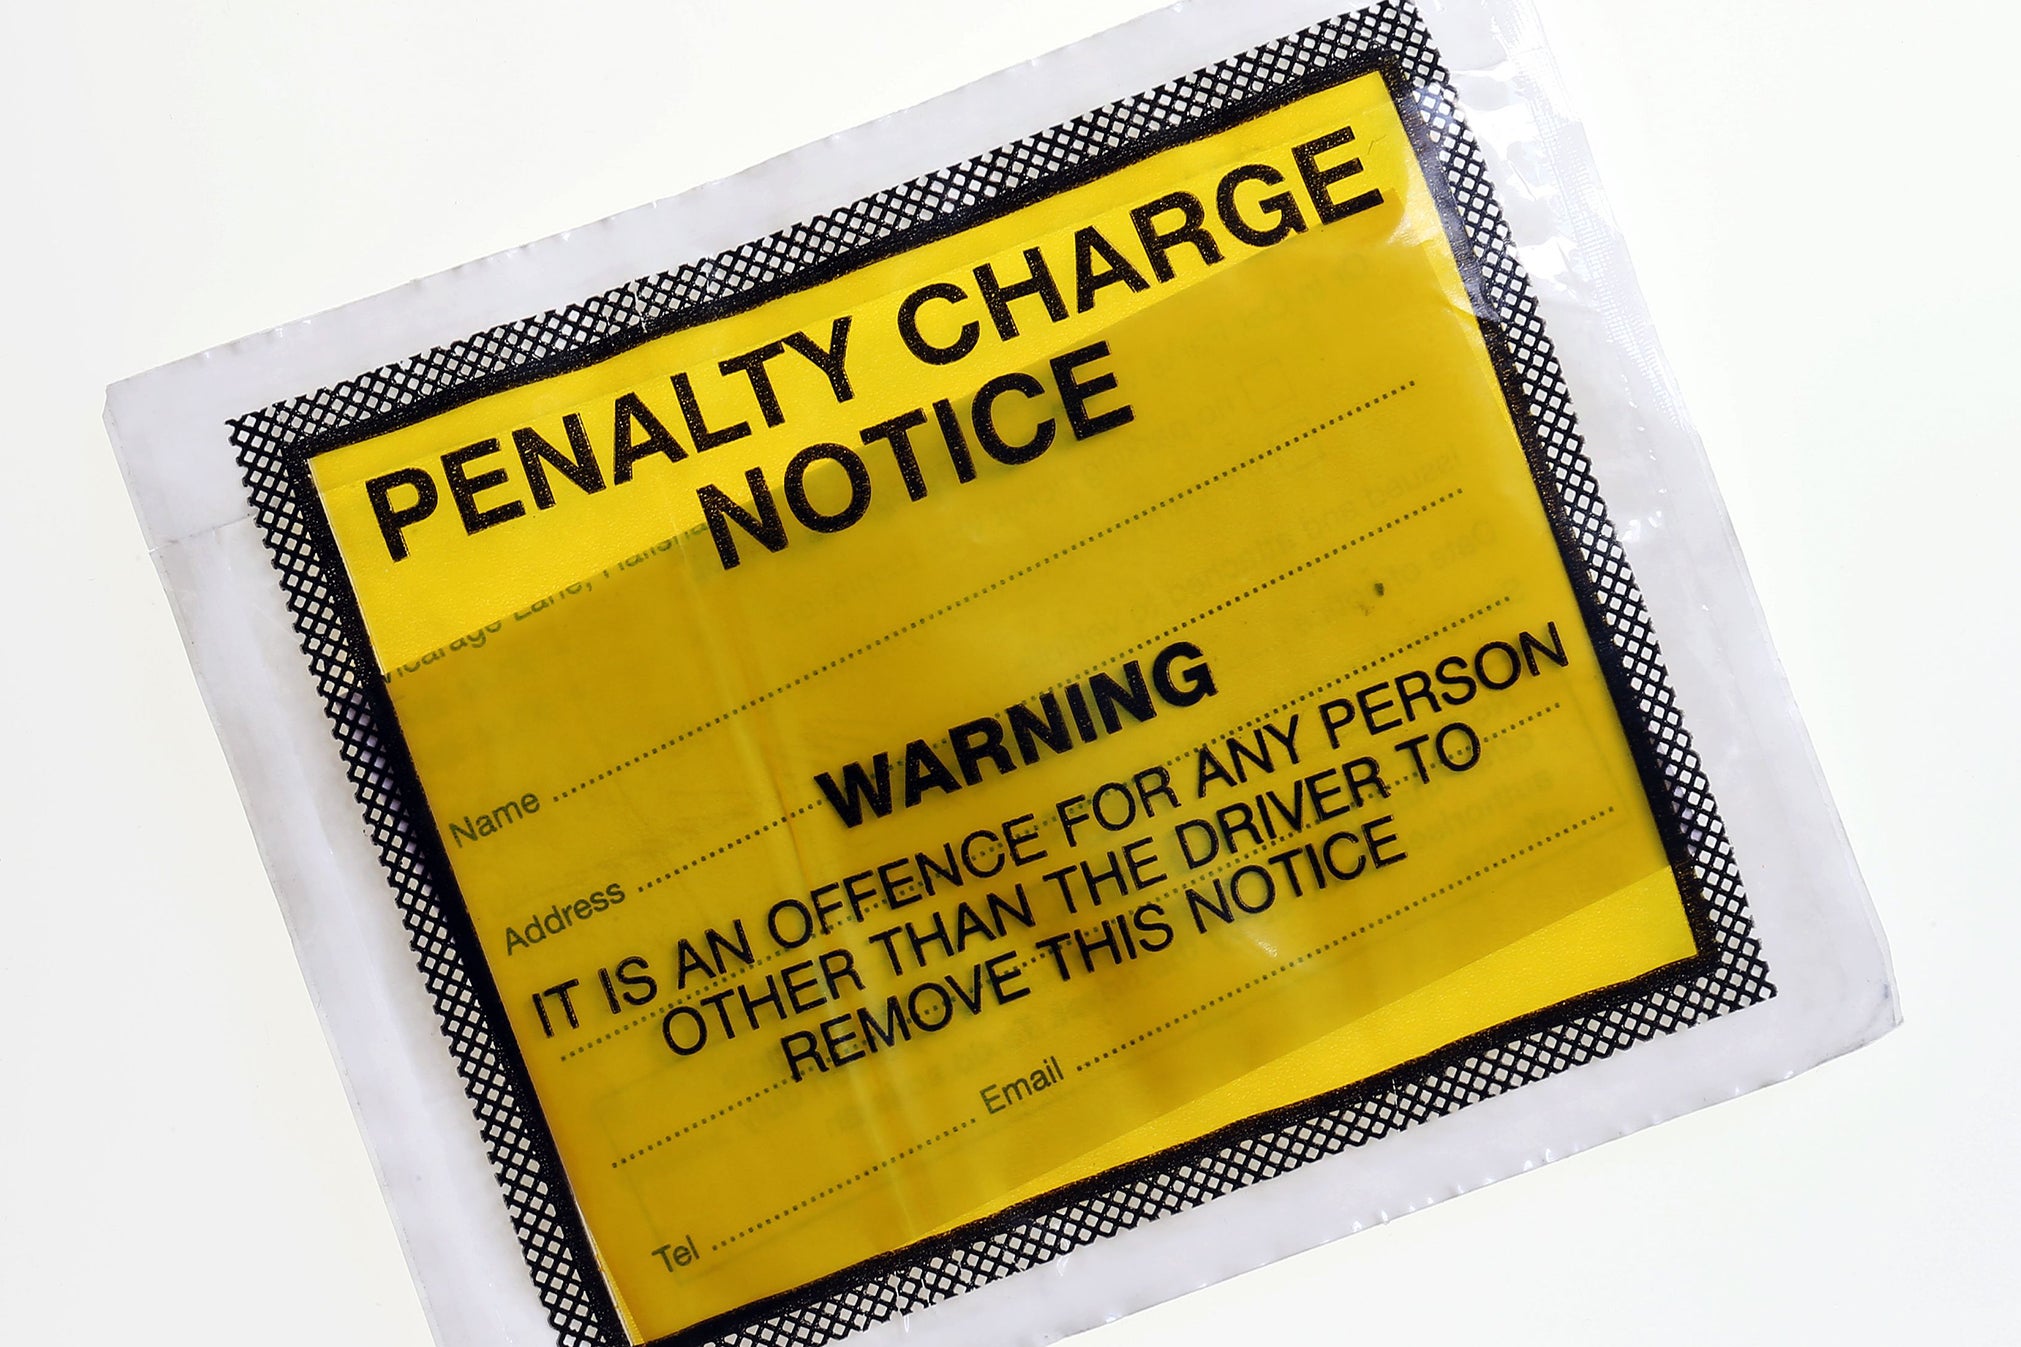 Smart Parking refused to drop the penalty charge of £50 until Matalan were contacted